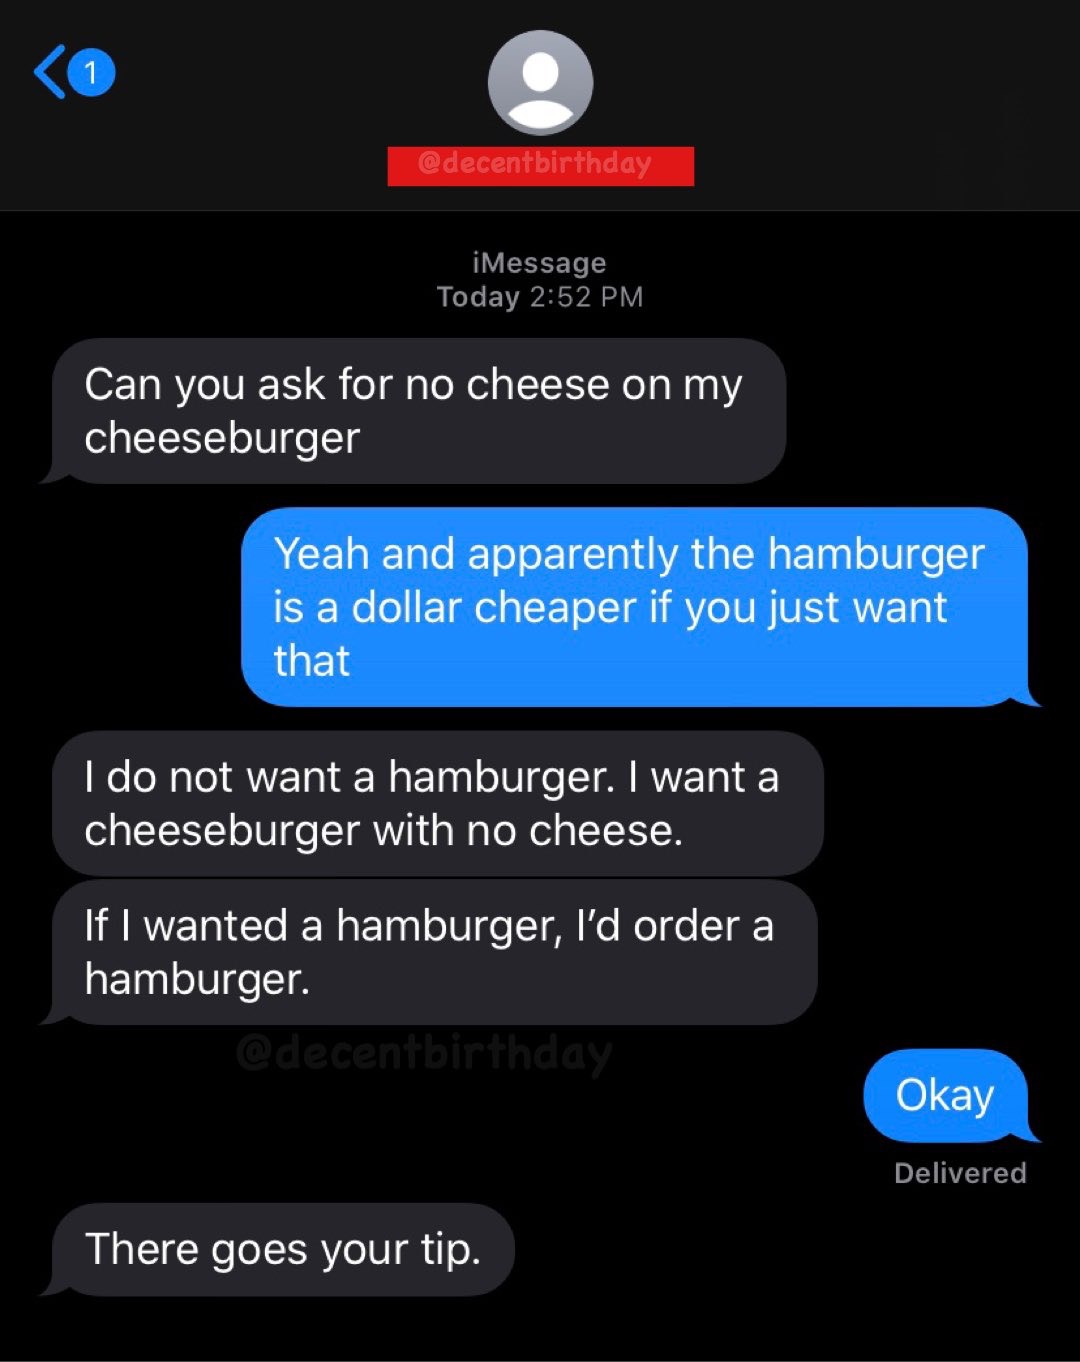 screenshot - 1 iMessage Today Can you ask for no cheese on my cheeseburger Yeah and apparently the hamburger is a dollar cheaper if you just want that I do not want a hamburger. I want a cheeseburger with no cheese. If I wanted a hamburger, I'd order a ha